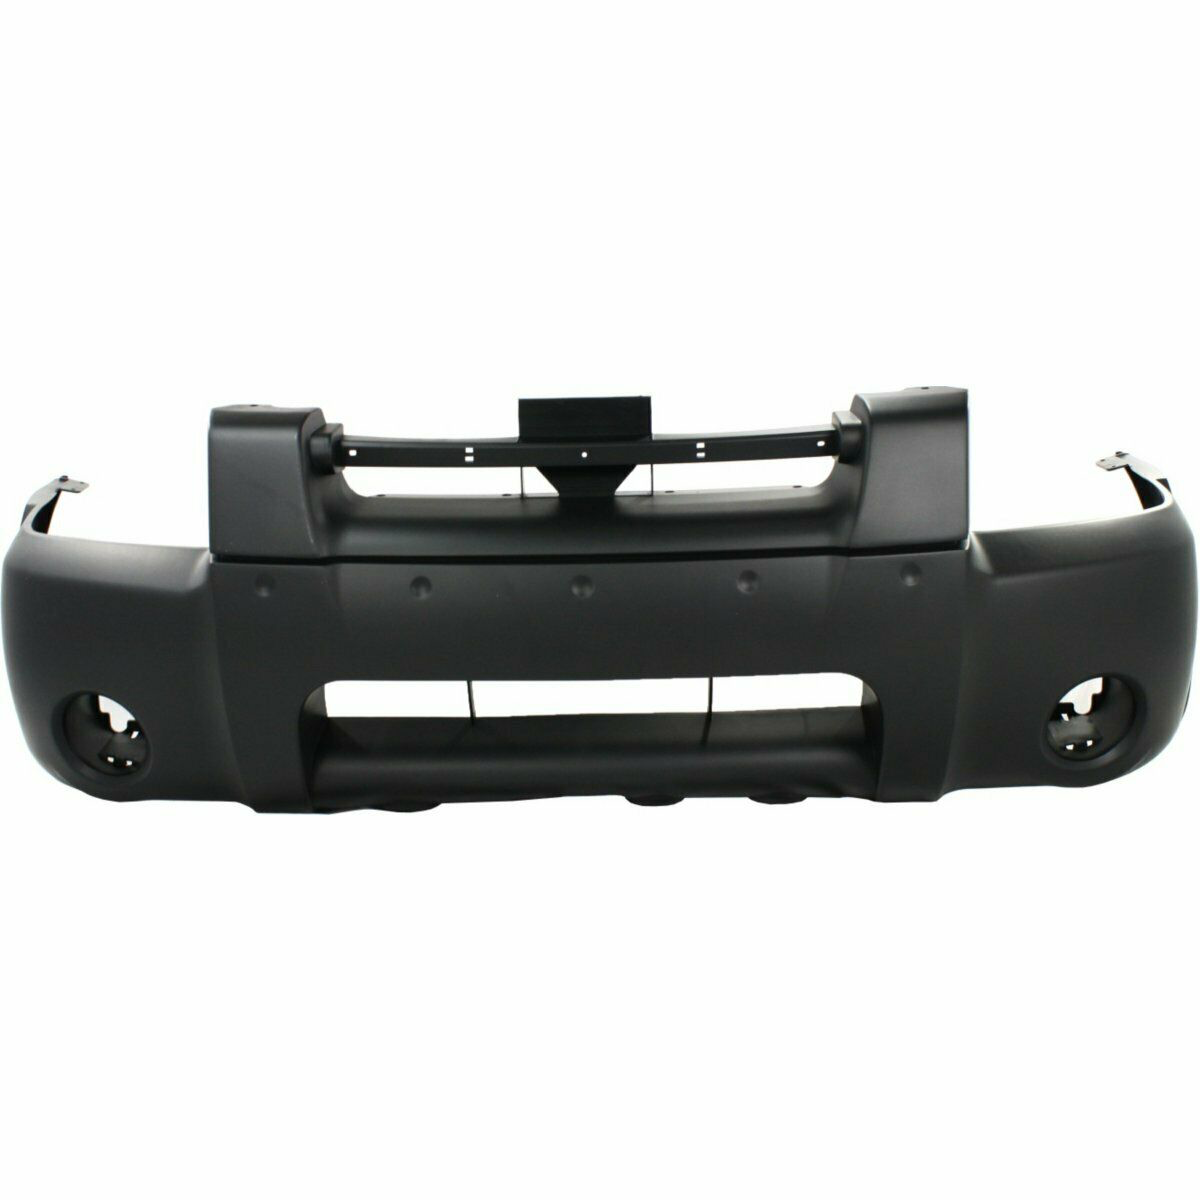 2001-2002 Nissan Frontier Front Bumper Painted to Match